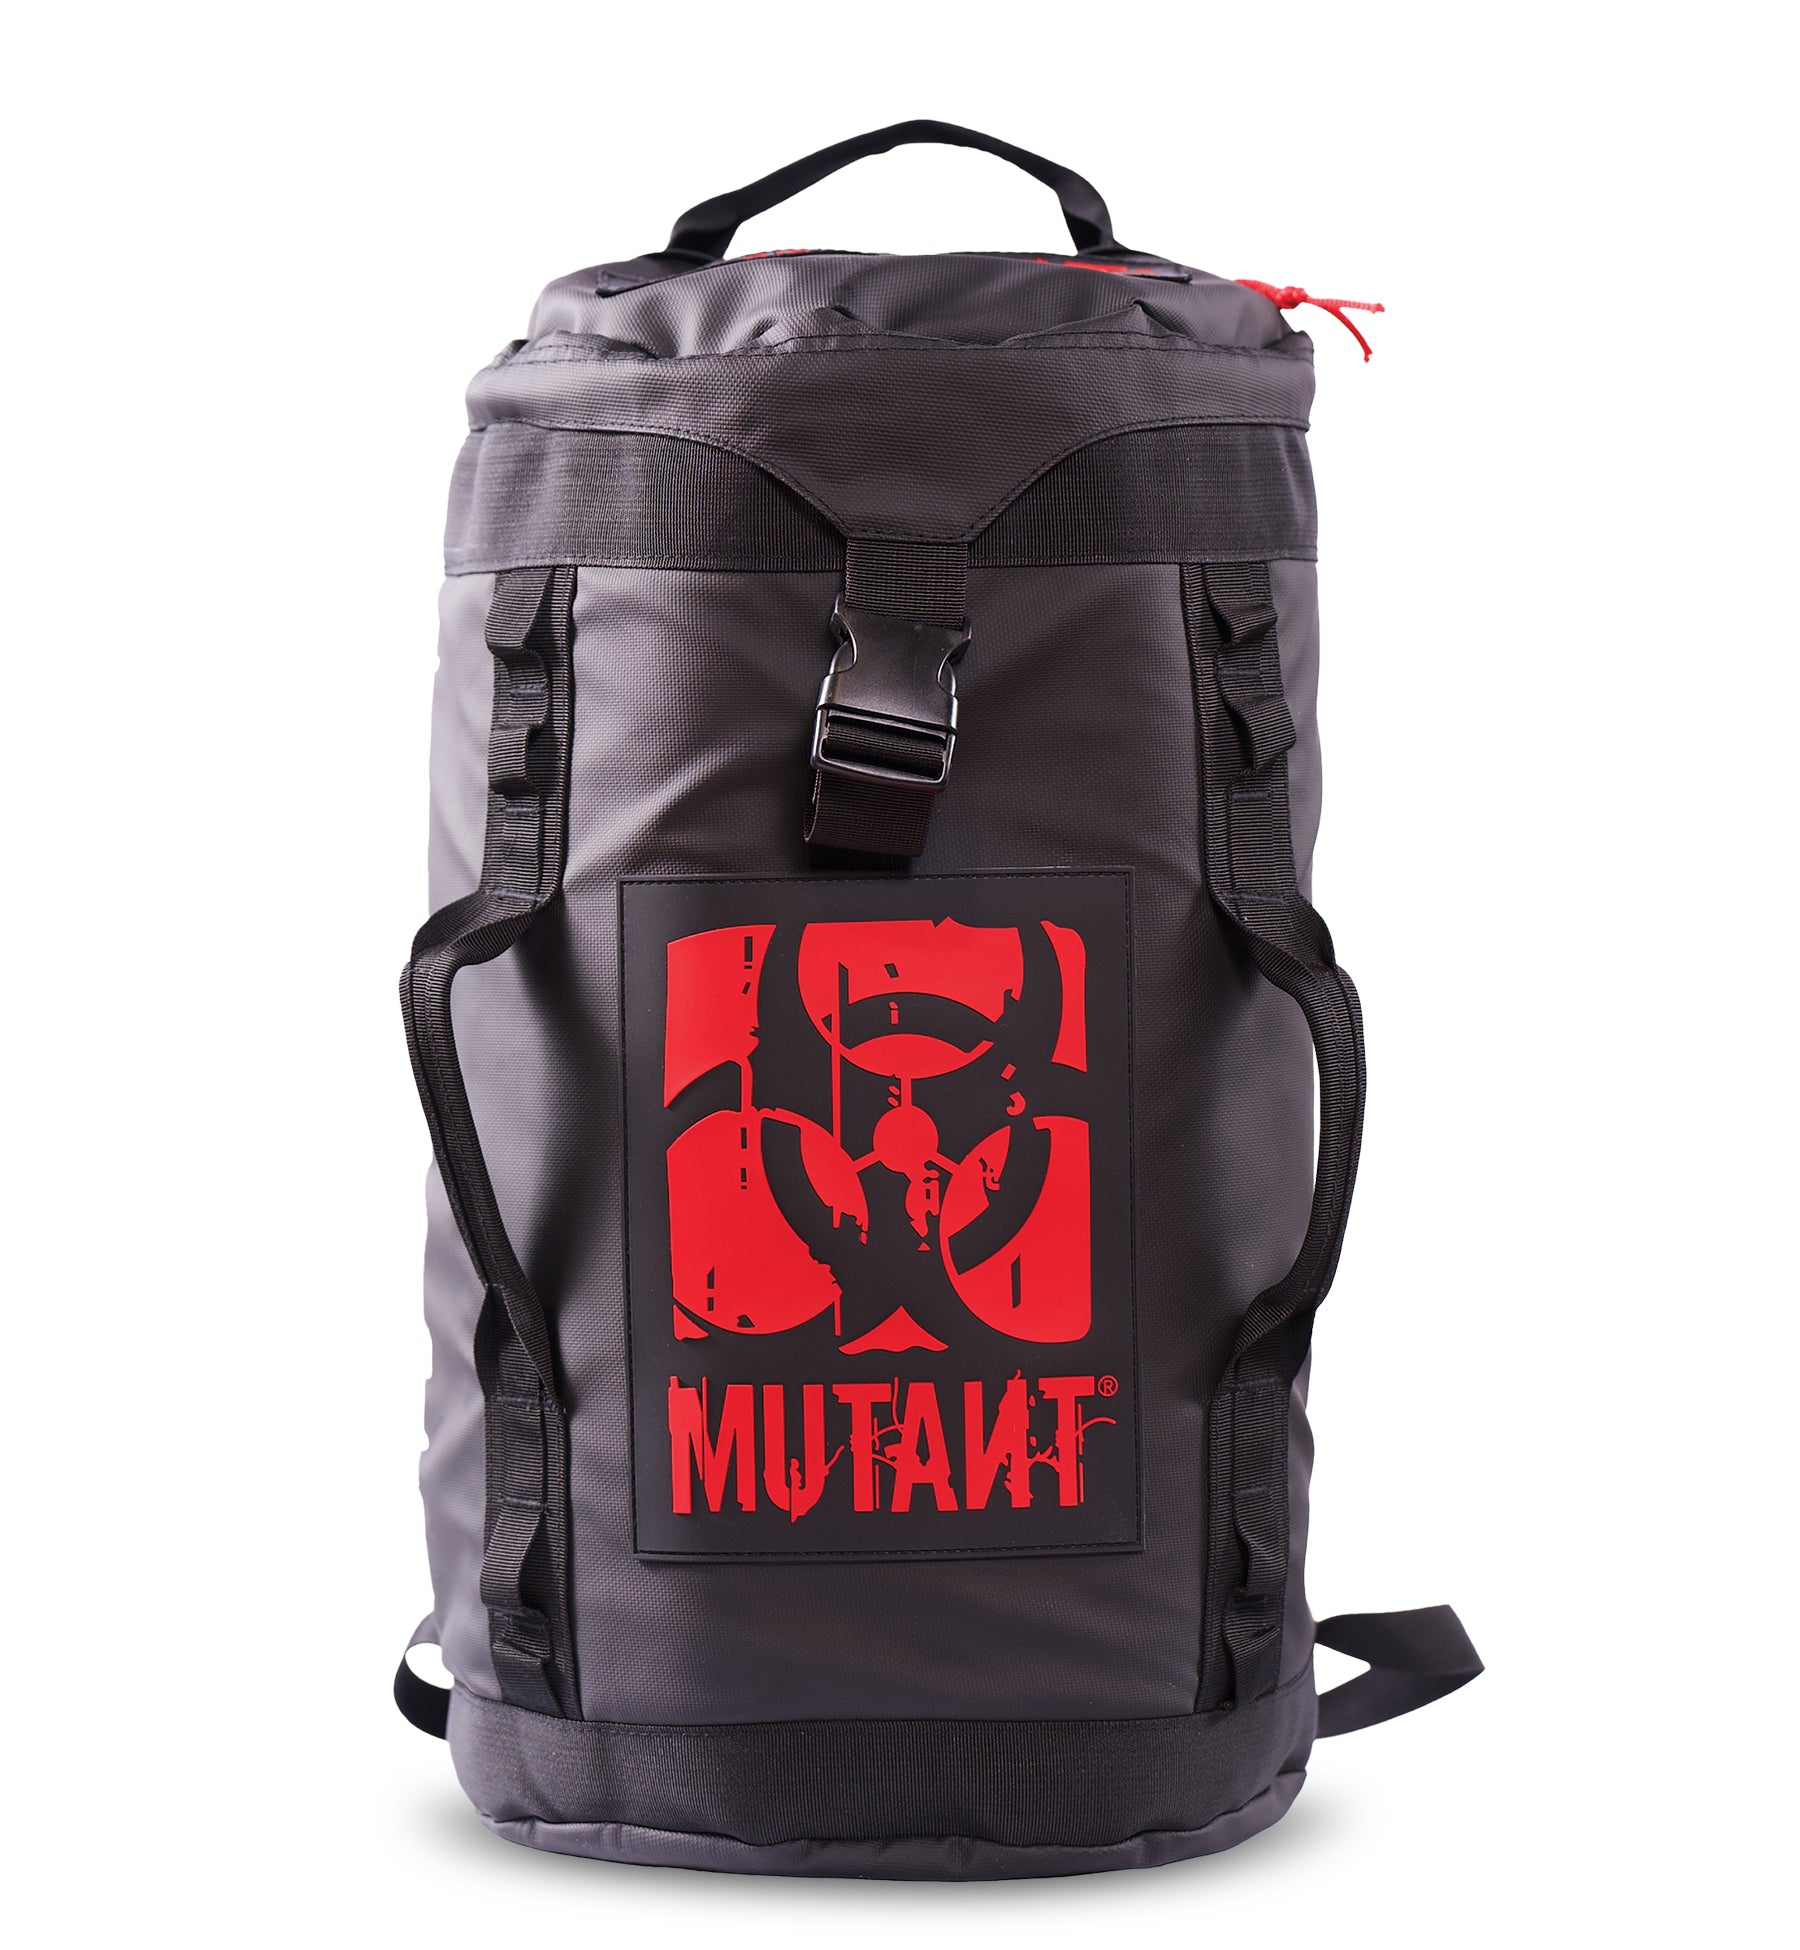 A black Military Top Load Duffel Backpack with a red 'MUTANT' logo at the center, displayed against a white background.